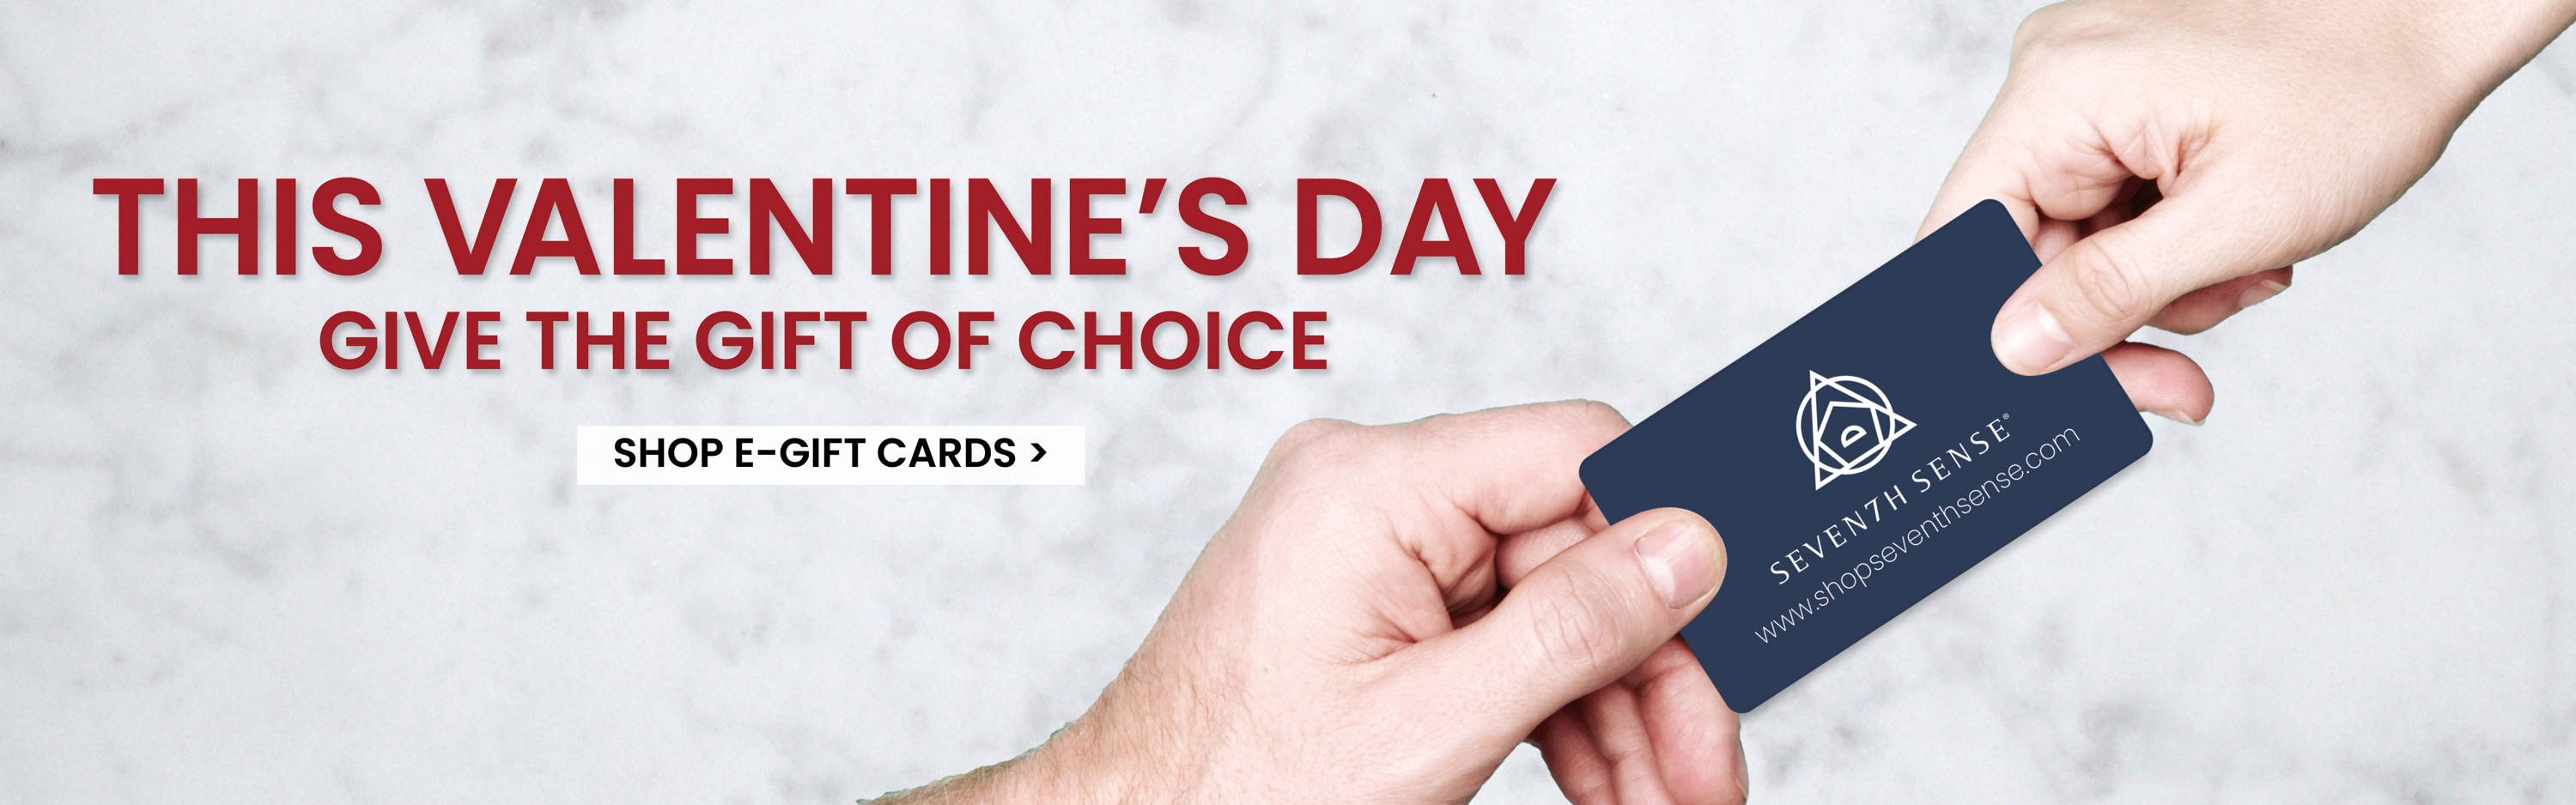 This Valentine's Day Give the Gift of Choice. Shop E-Gift Cards.